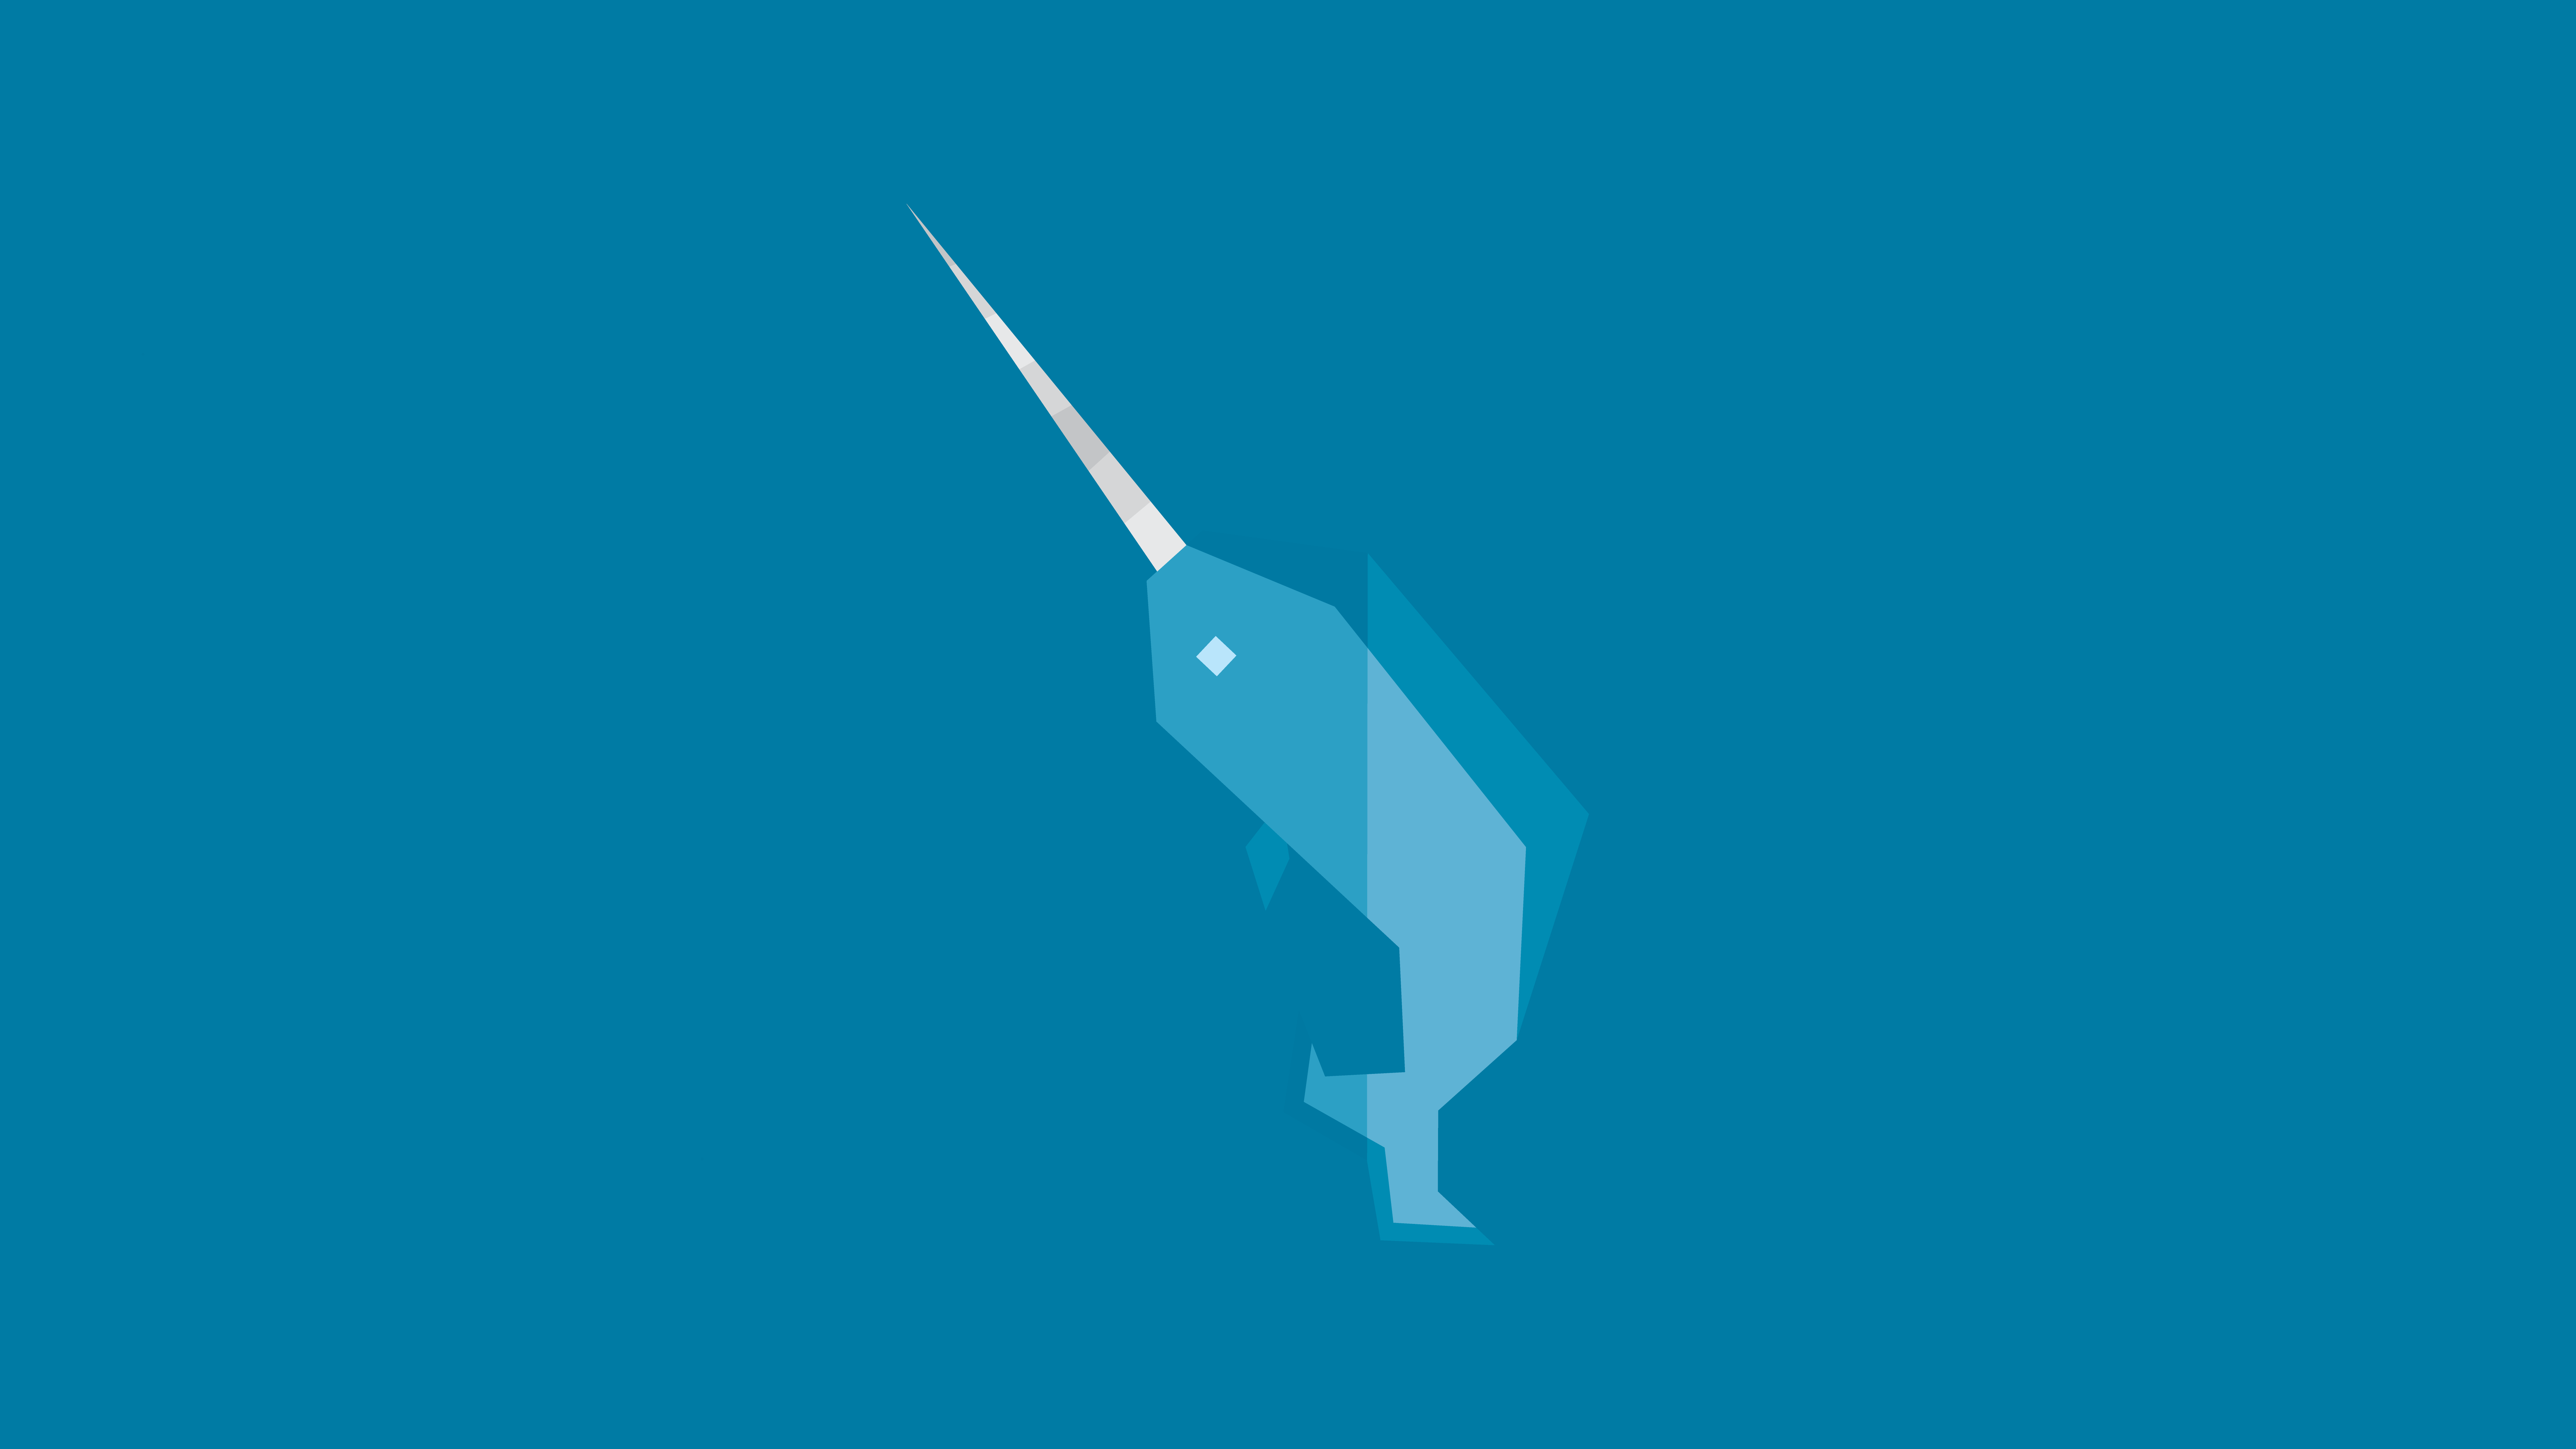 Geometric Narwhal Wallpaper By Plusjack On Deviantart HD Wallpapers Download Free Images Wallpaper [wallpaper981.blogspot.com]